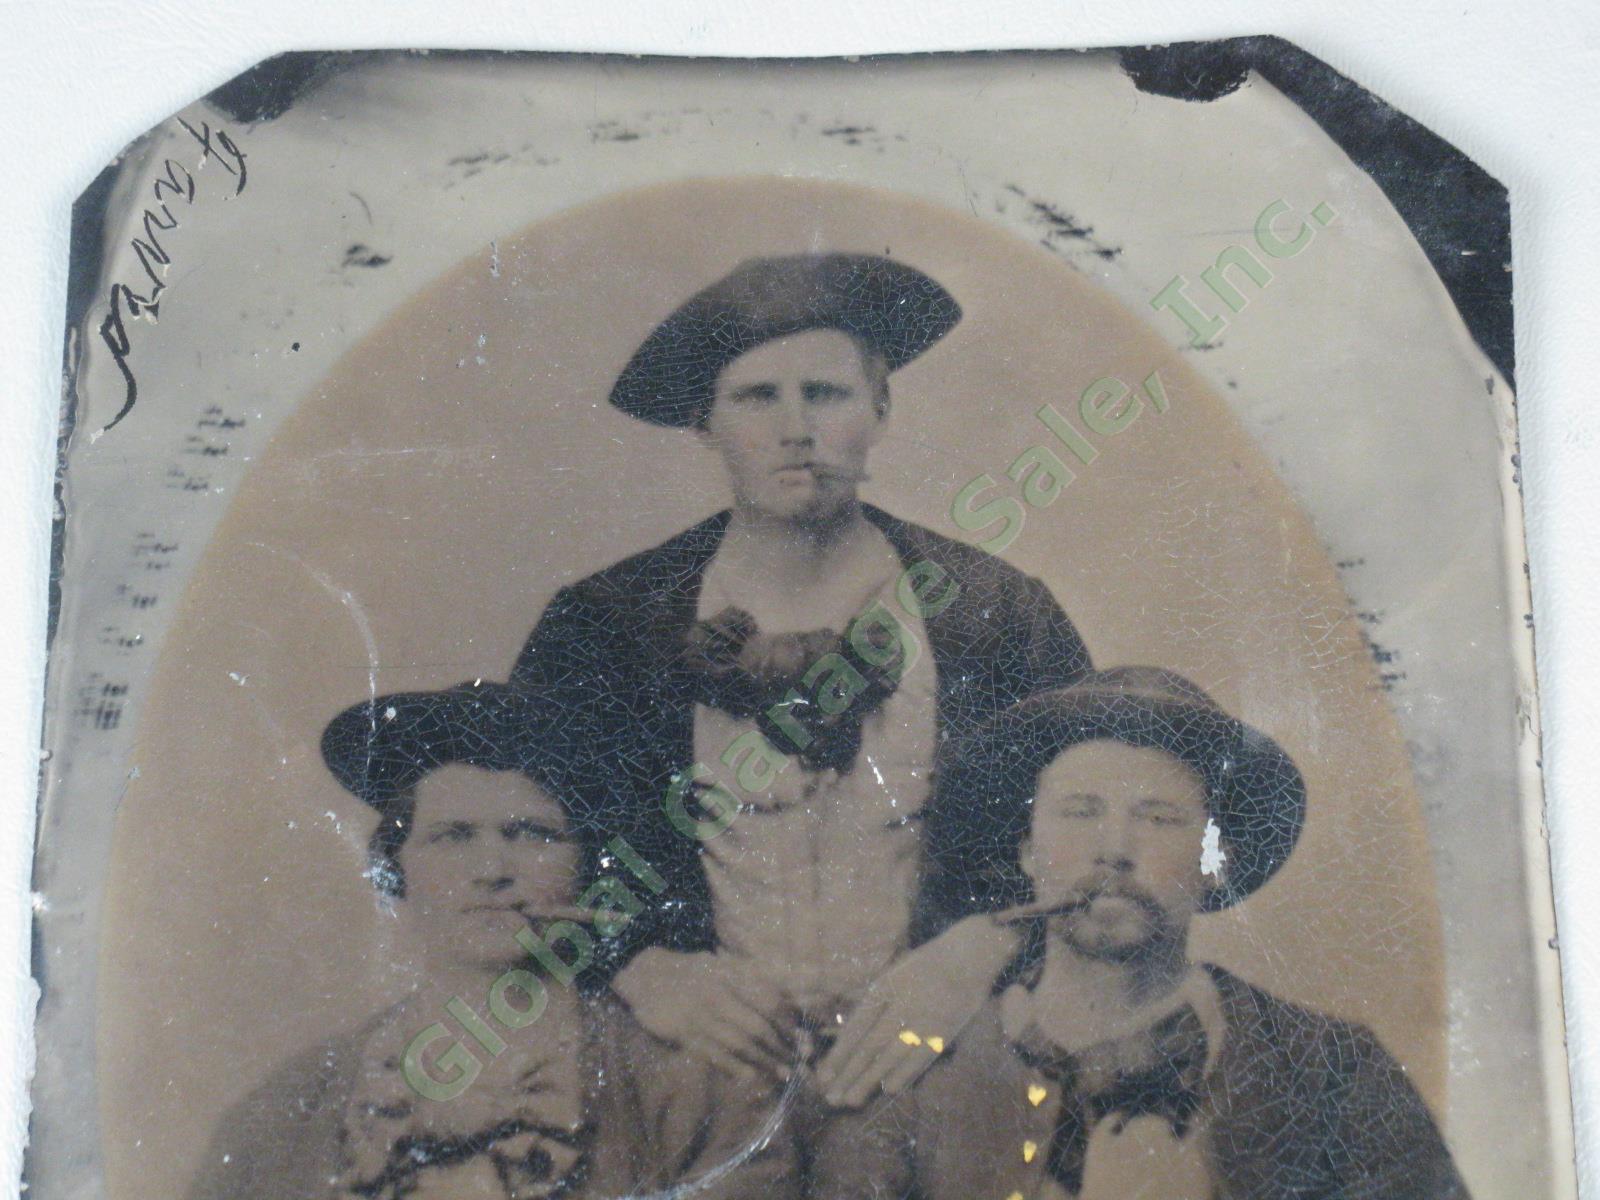 Antique Whole Plate Tintype Photo 6.5"x8.5" Man Woman Cigars Portrait Farved NR! 1